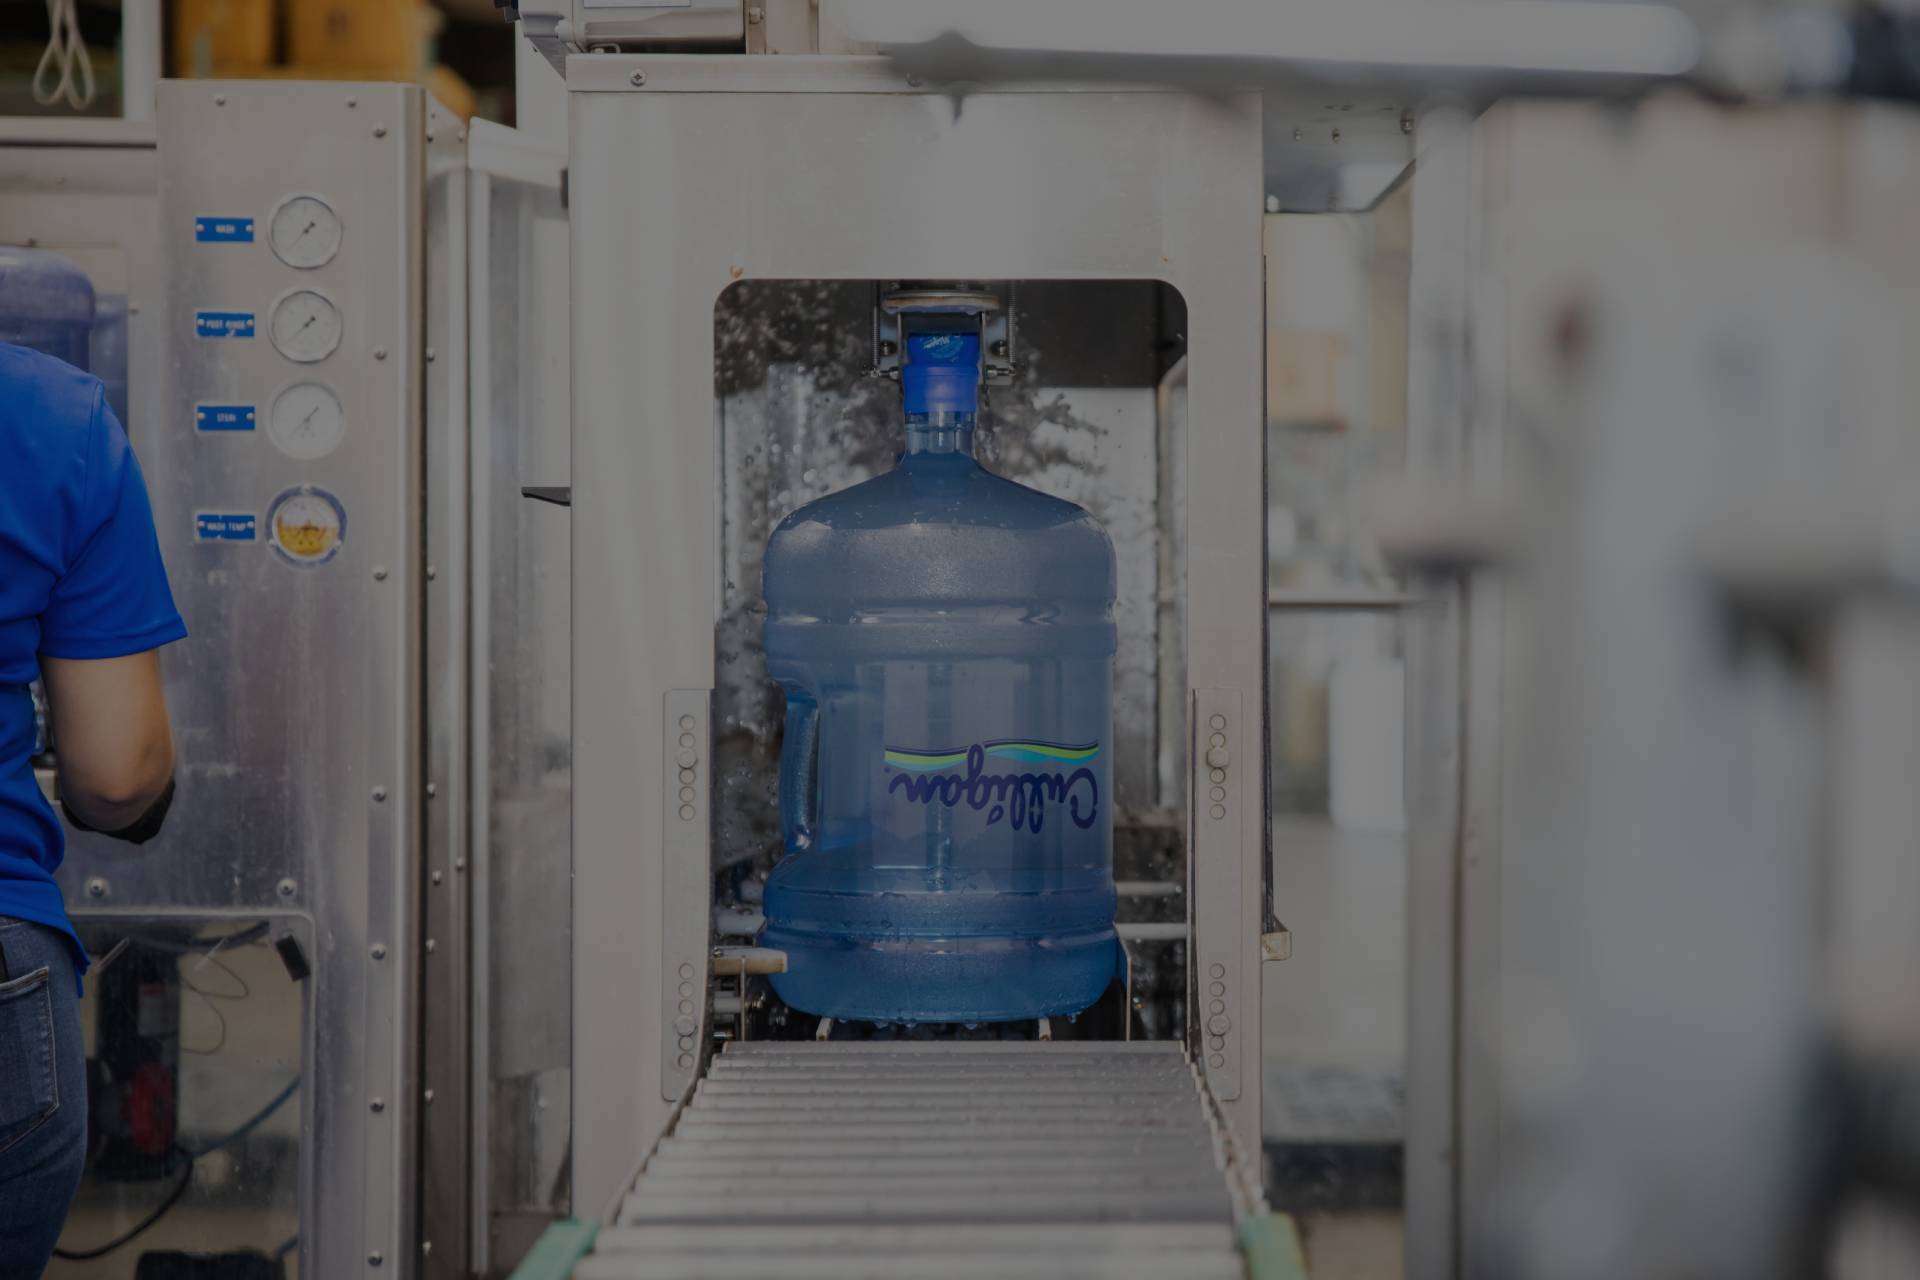 A Water dispenser bottle by Culligan being refilled by a machine